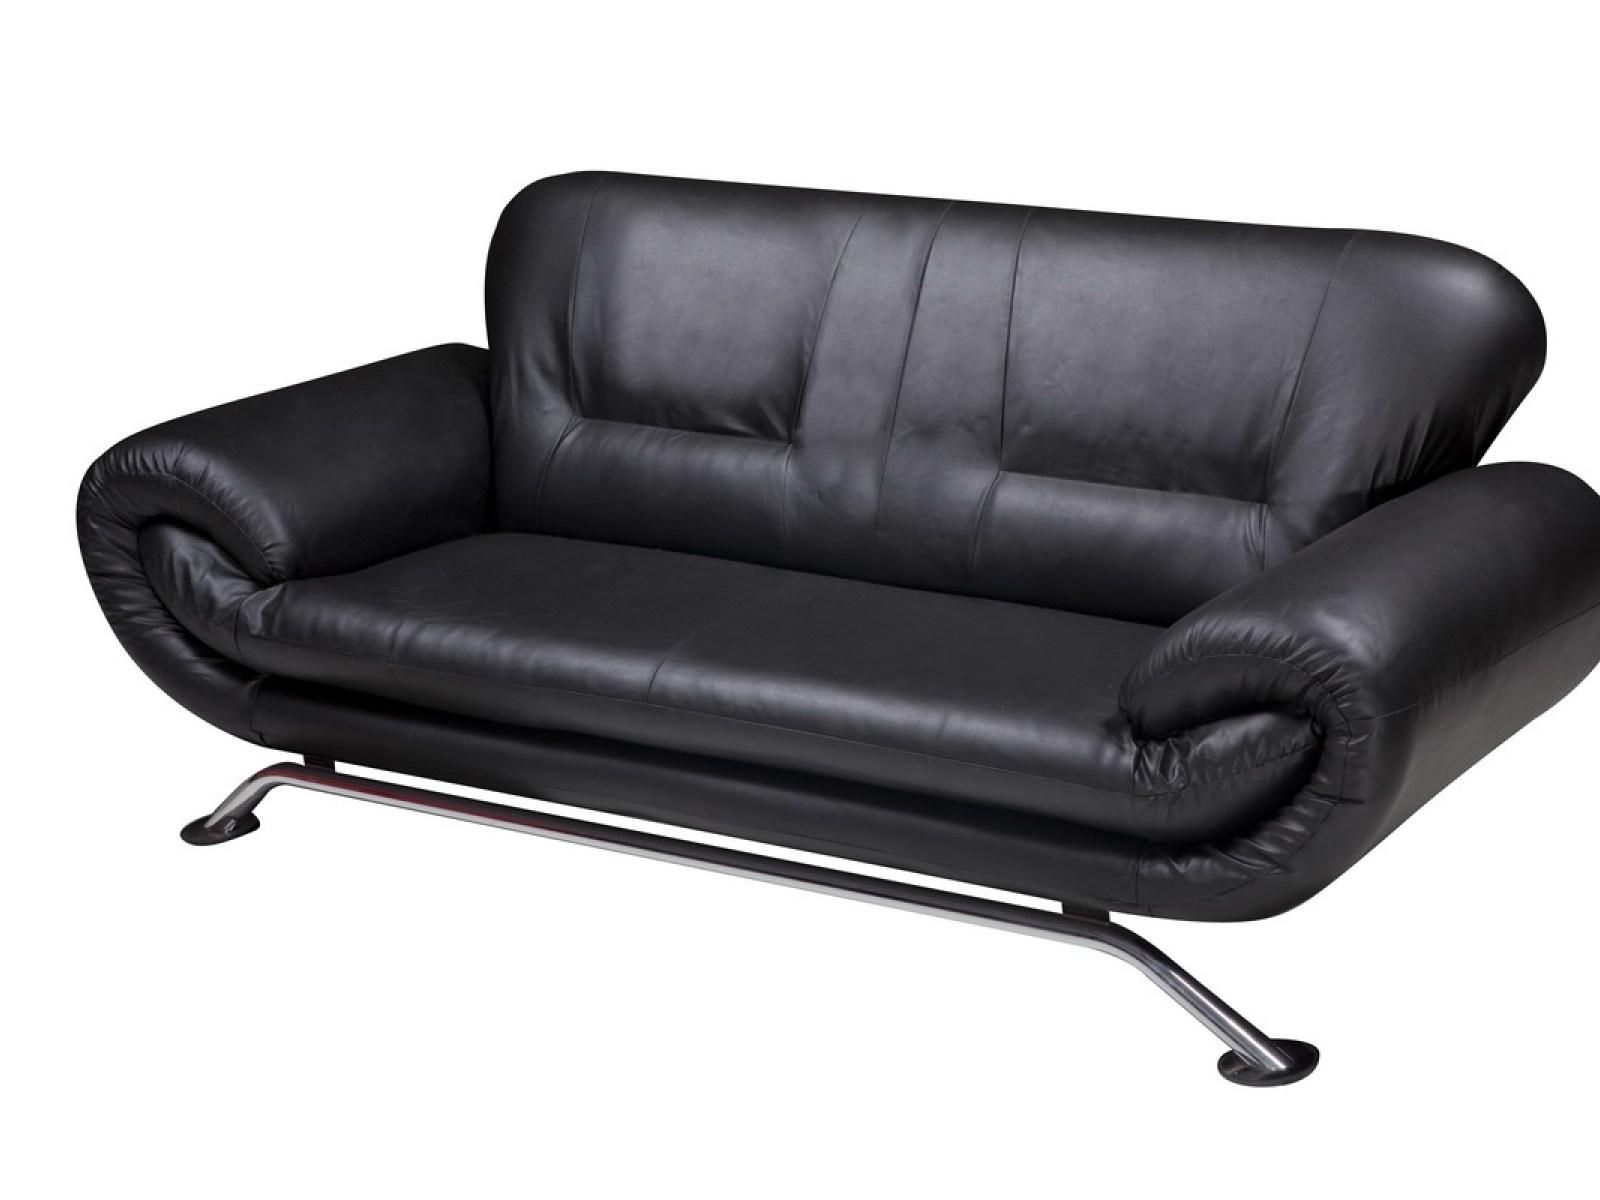 ▻ Sofa : 21 Lovely 3 Seater Also Black Chesterfield Sofa For Sale With 3 Seater Sofas For Sale (View 8 of 21)